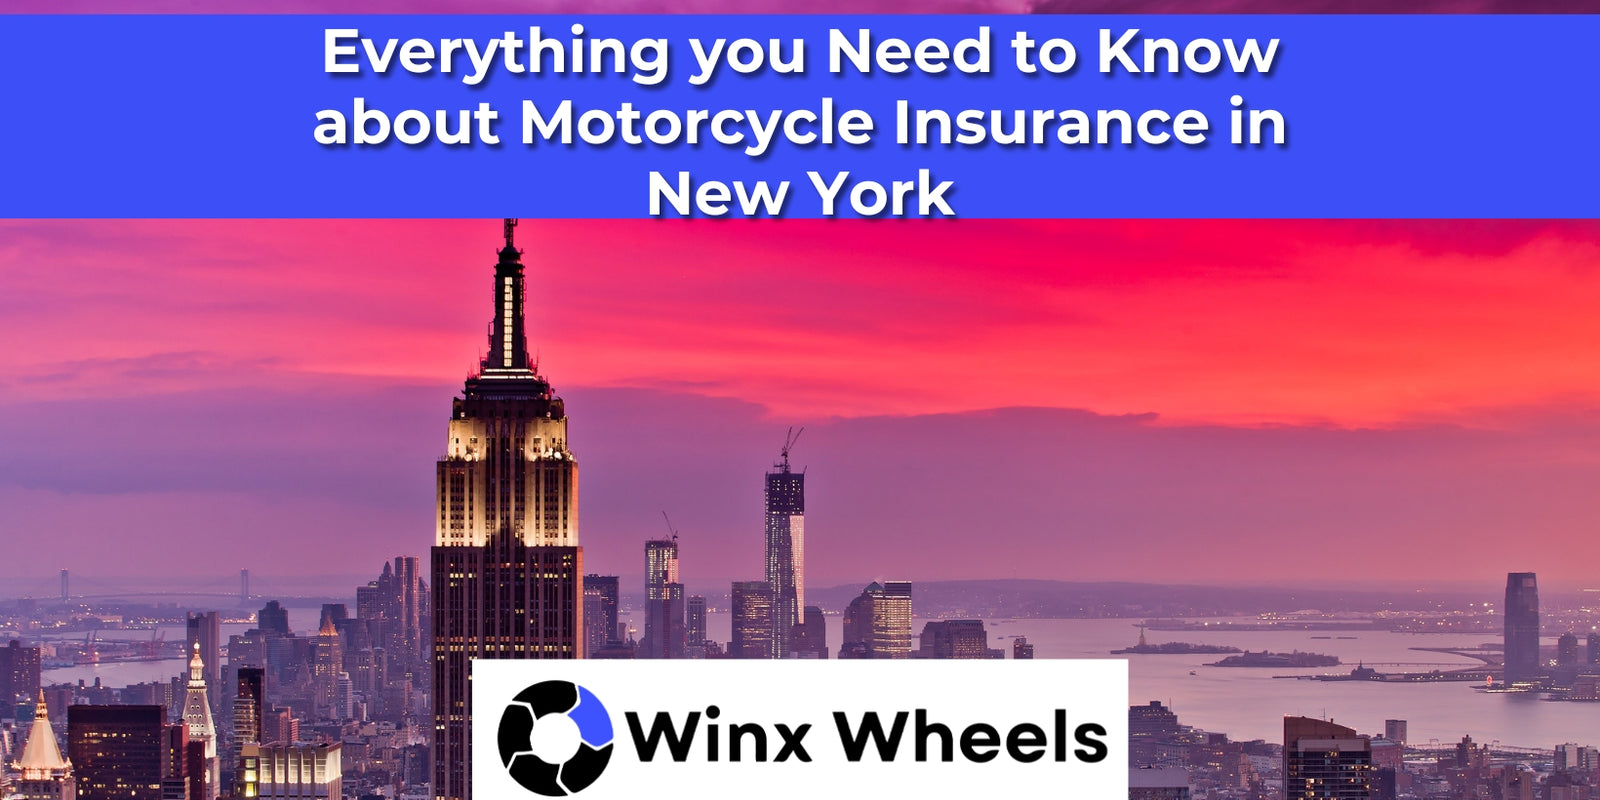 Everything you Need to Know about Motorcycle Insurance in New York